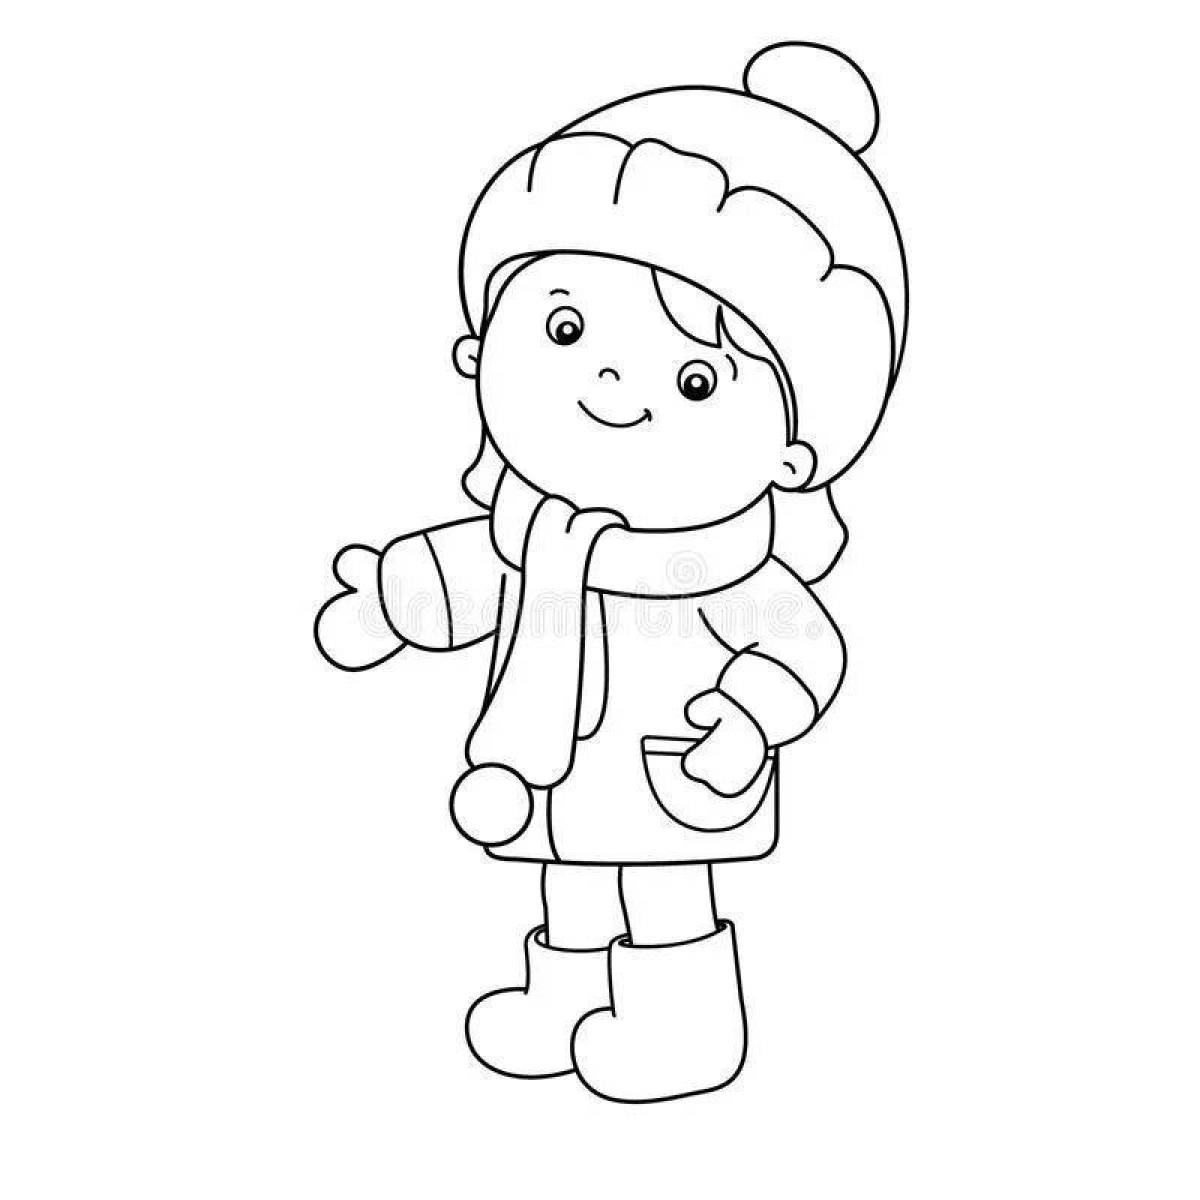 Live baby in winter clothes